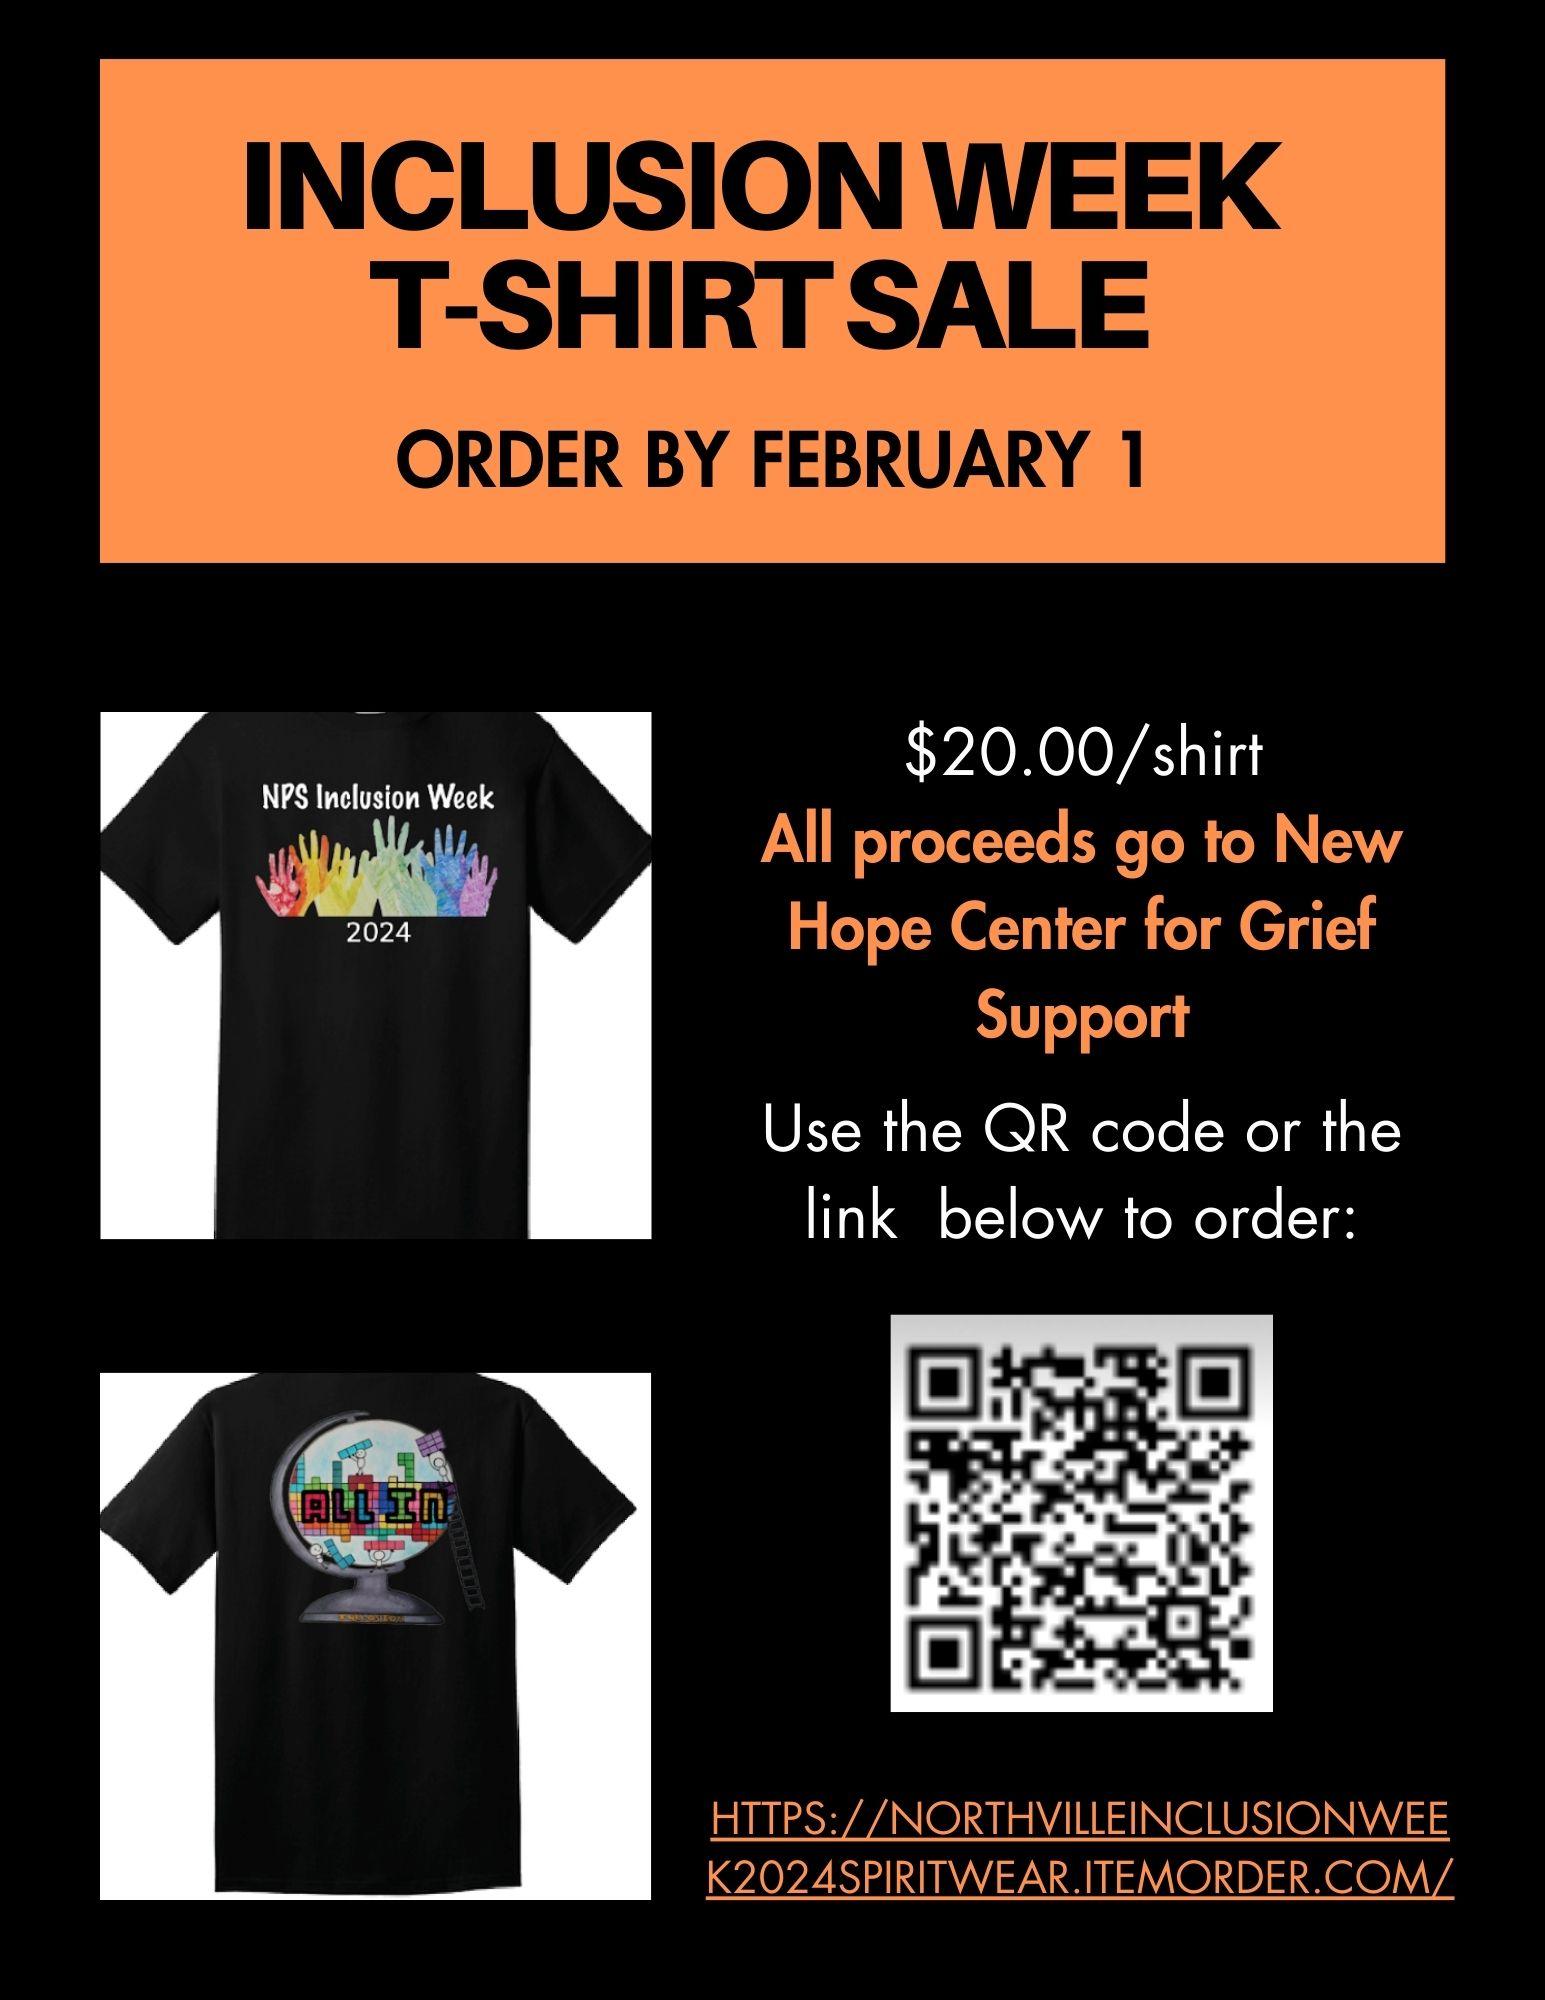 Inclusion Week T-shirt sale - Order by February 1 - $20/shirt, all proceeds go to New Hope Center for Grief Support. Use the QR code or the link below to order: